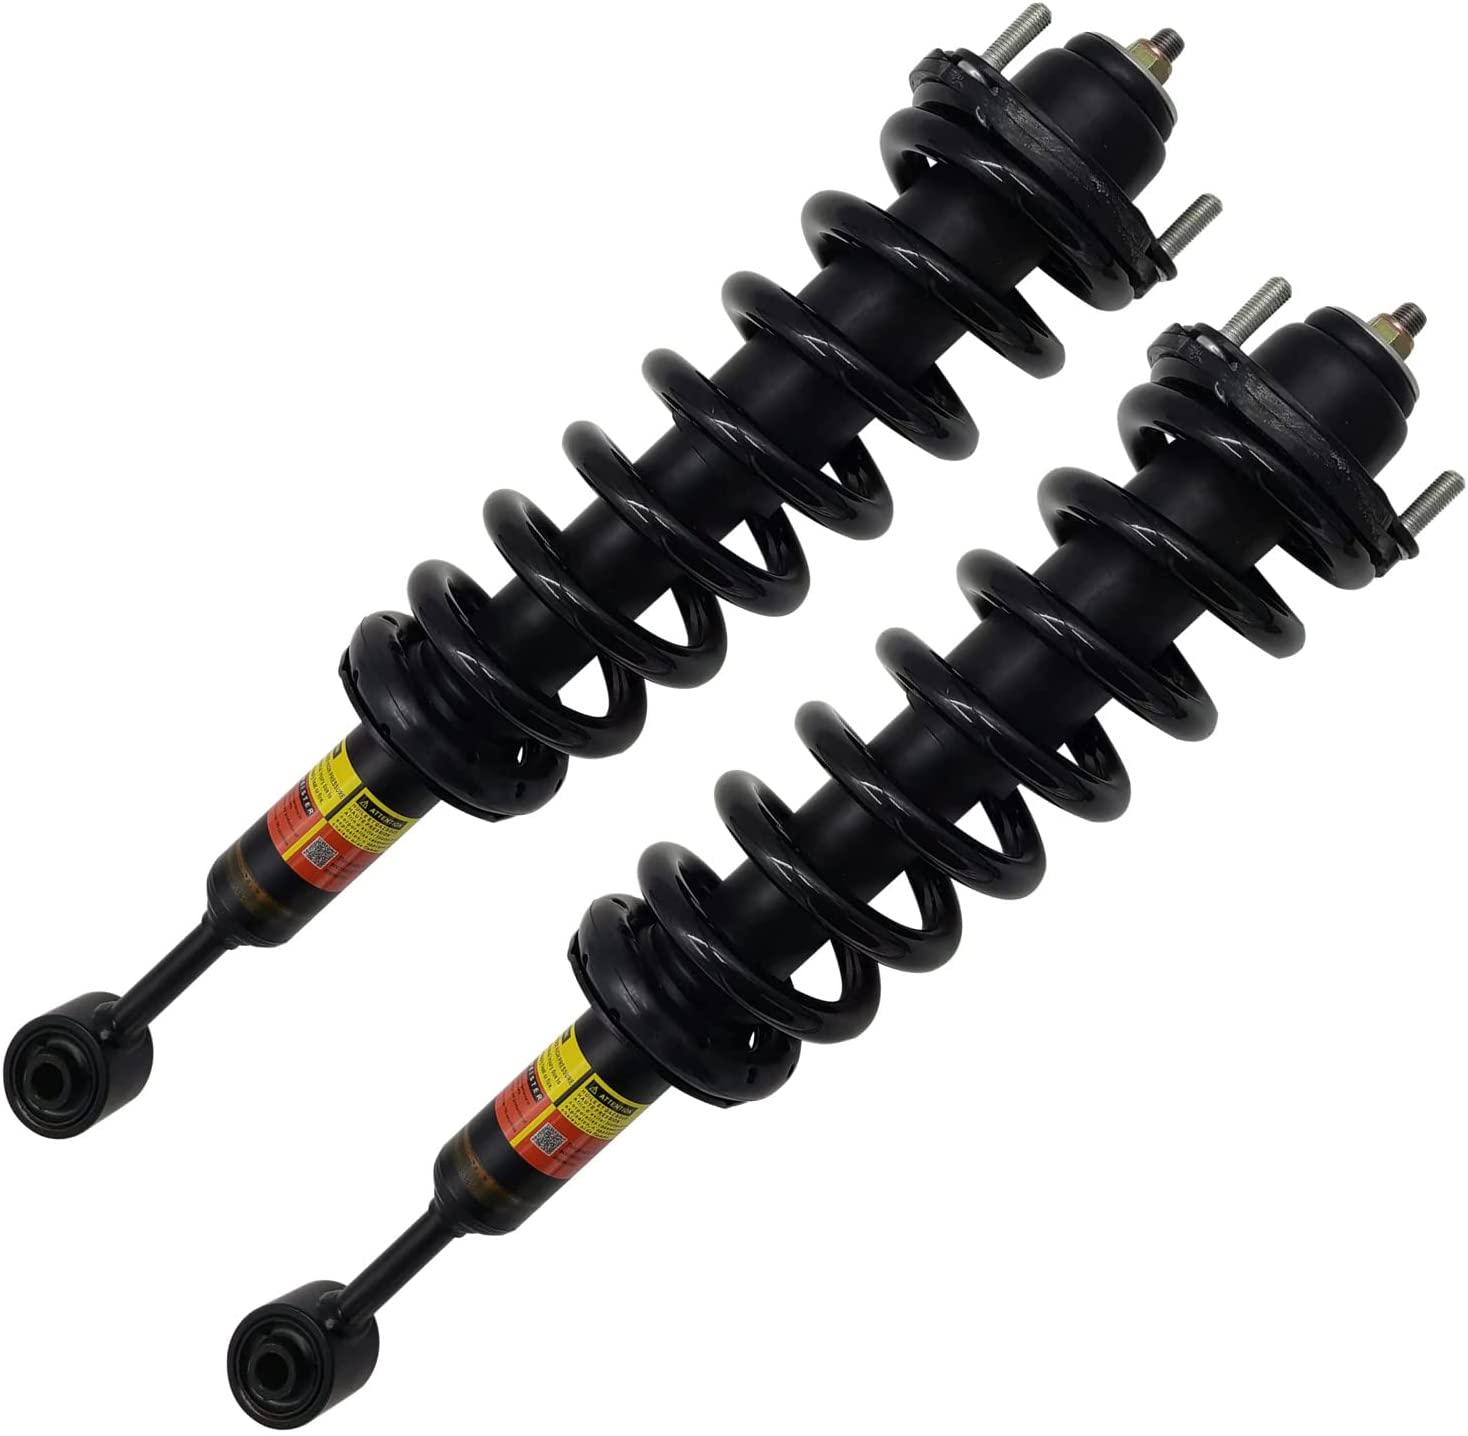 Pair Set of 2 Rear Monroe Shock Absorbers for Cadillac XTS w/o Electronic Susp